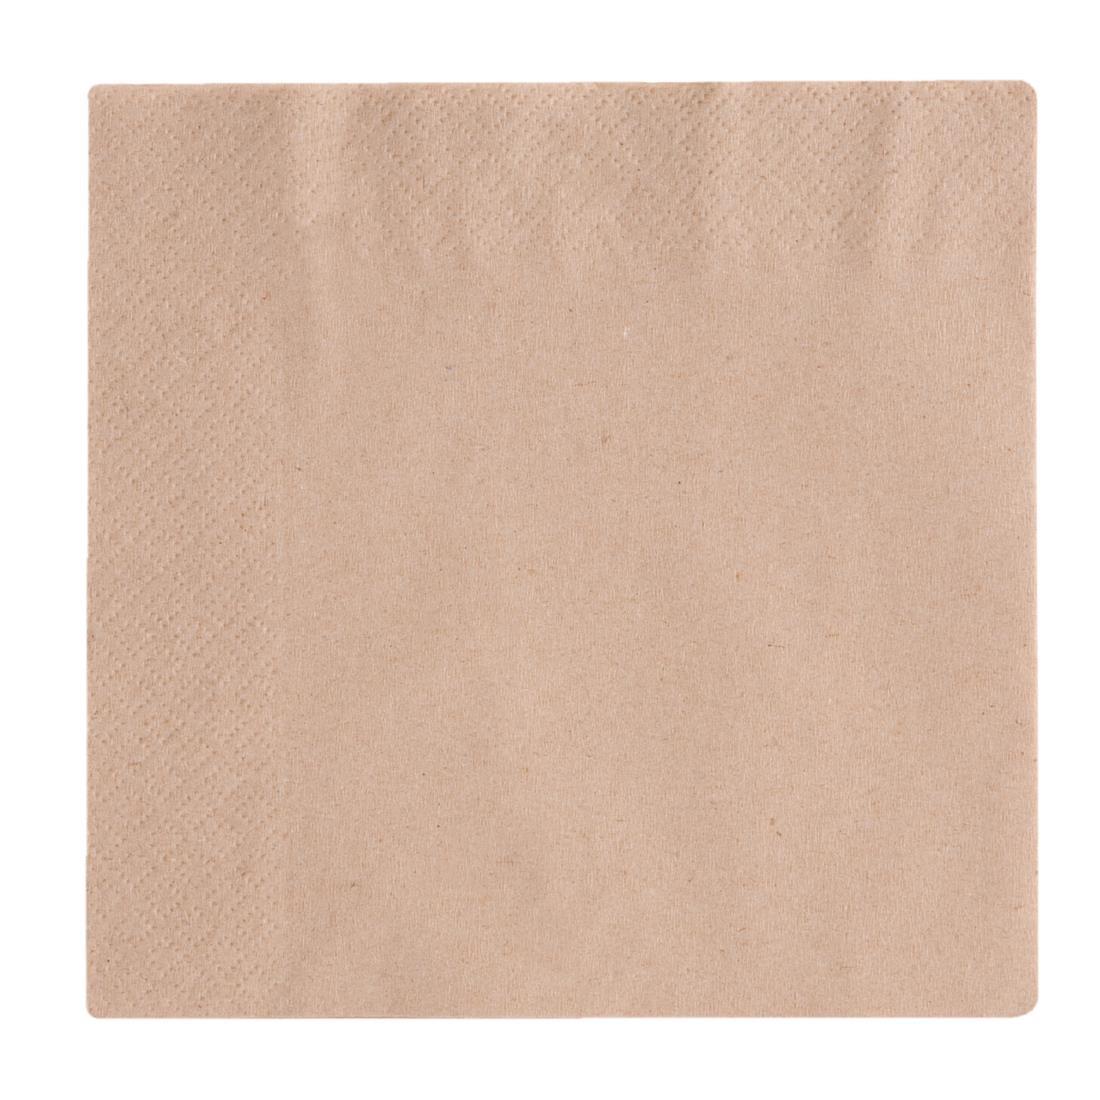 Vegware Recycled Lunch Napkin Kraft 33x33cm 2ply 1/4 Fold (Pack of 2000) - DW621  - 1